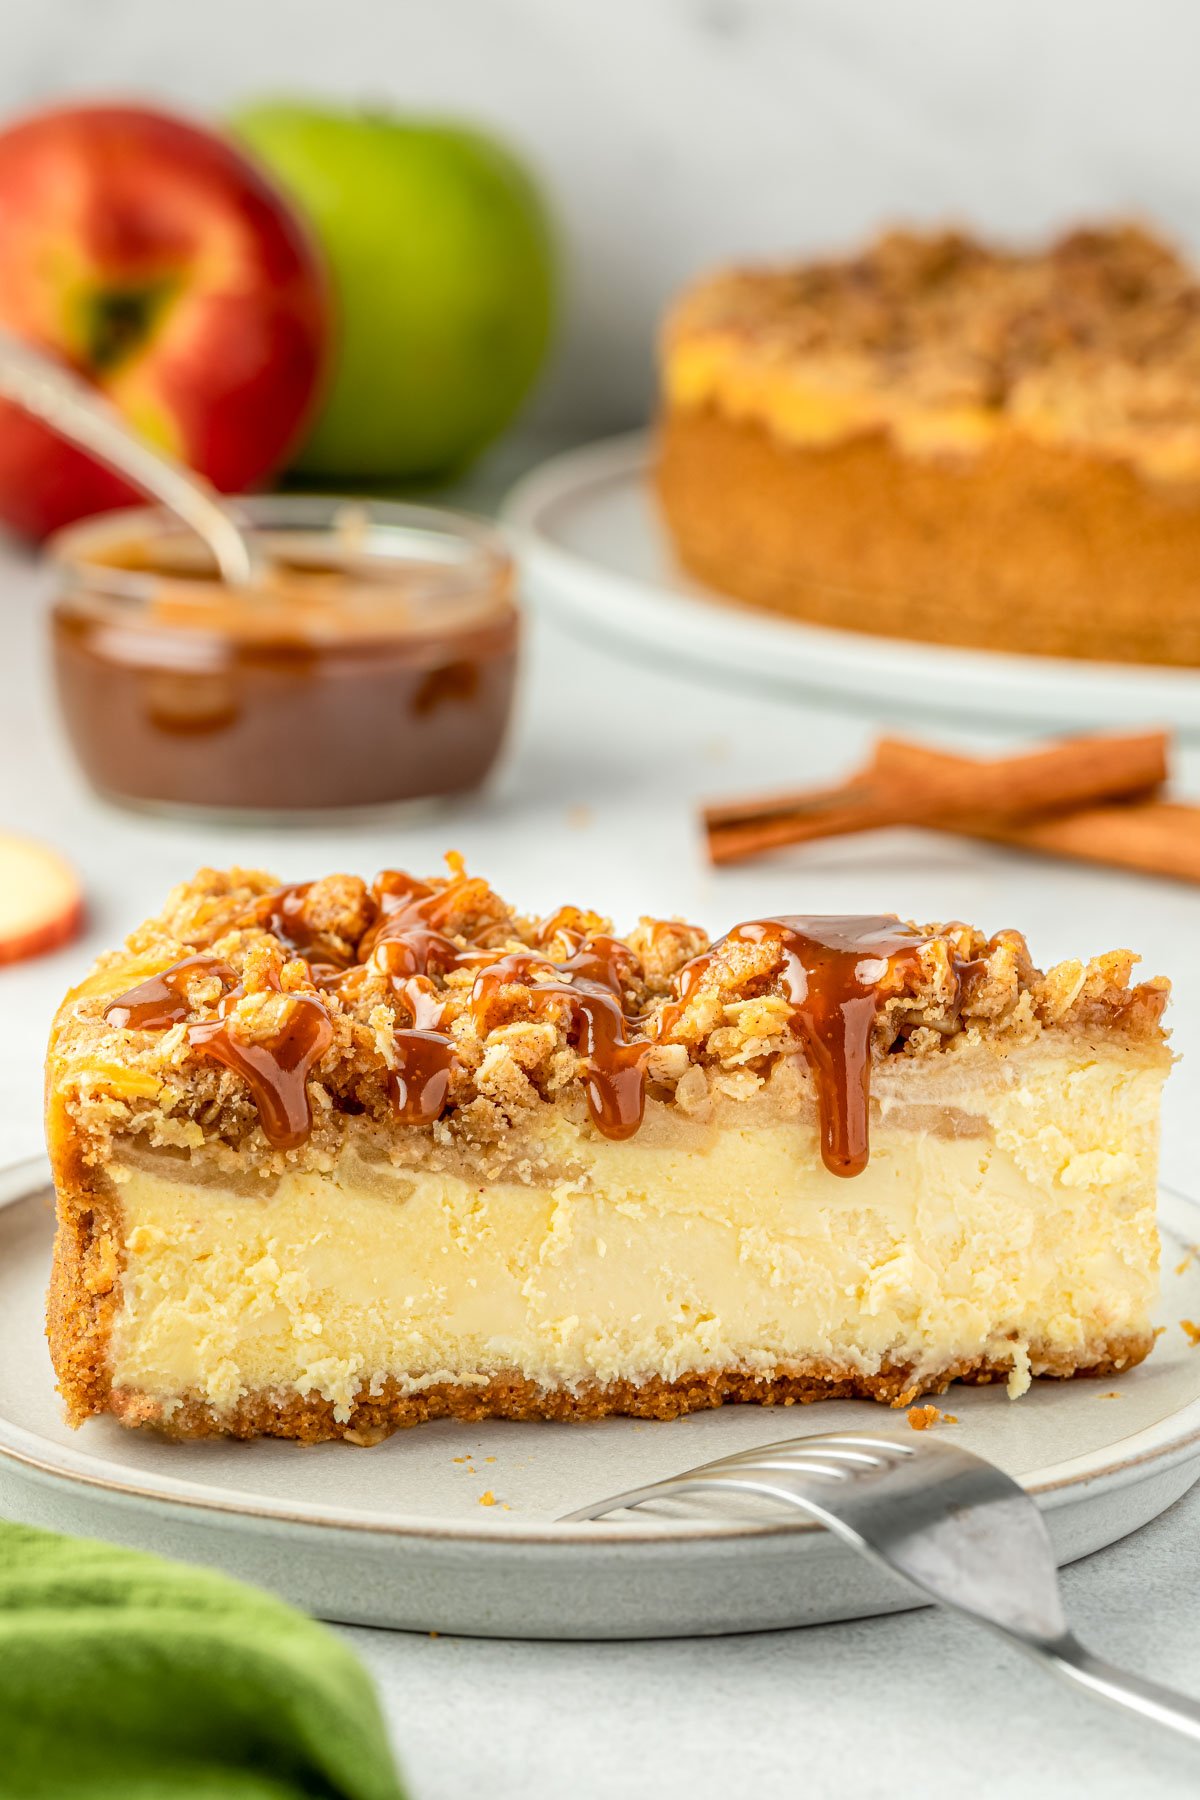 Slice of apple crumble cheesecake with a bowl of caramel sauce, a few apples, and the rest of the cheesecake in the background.